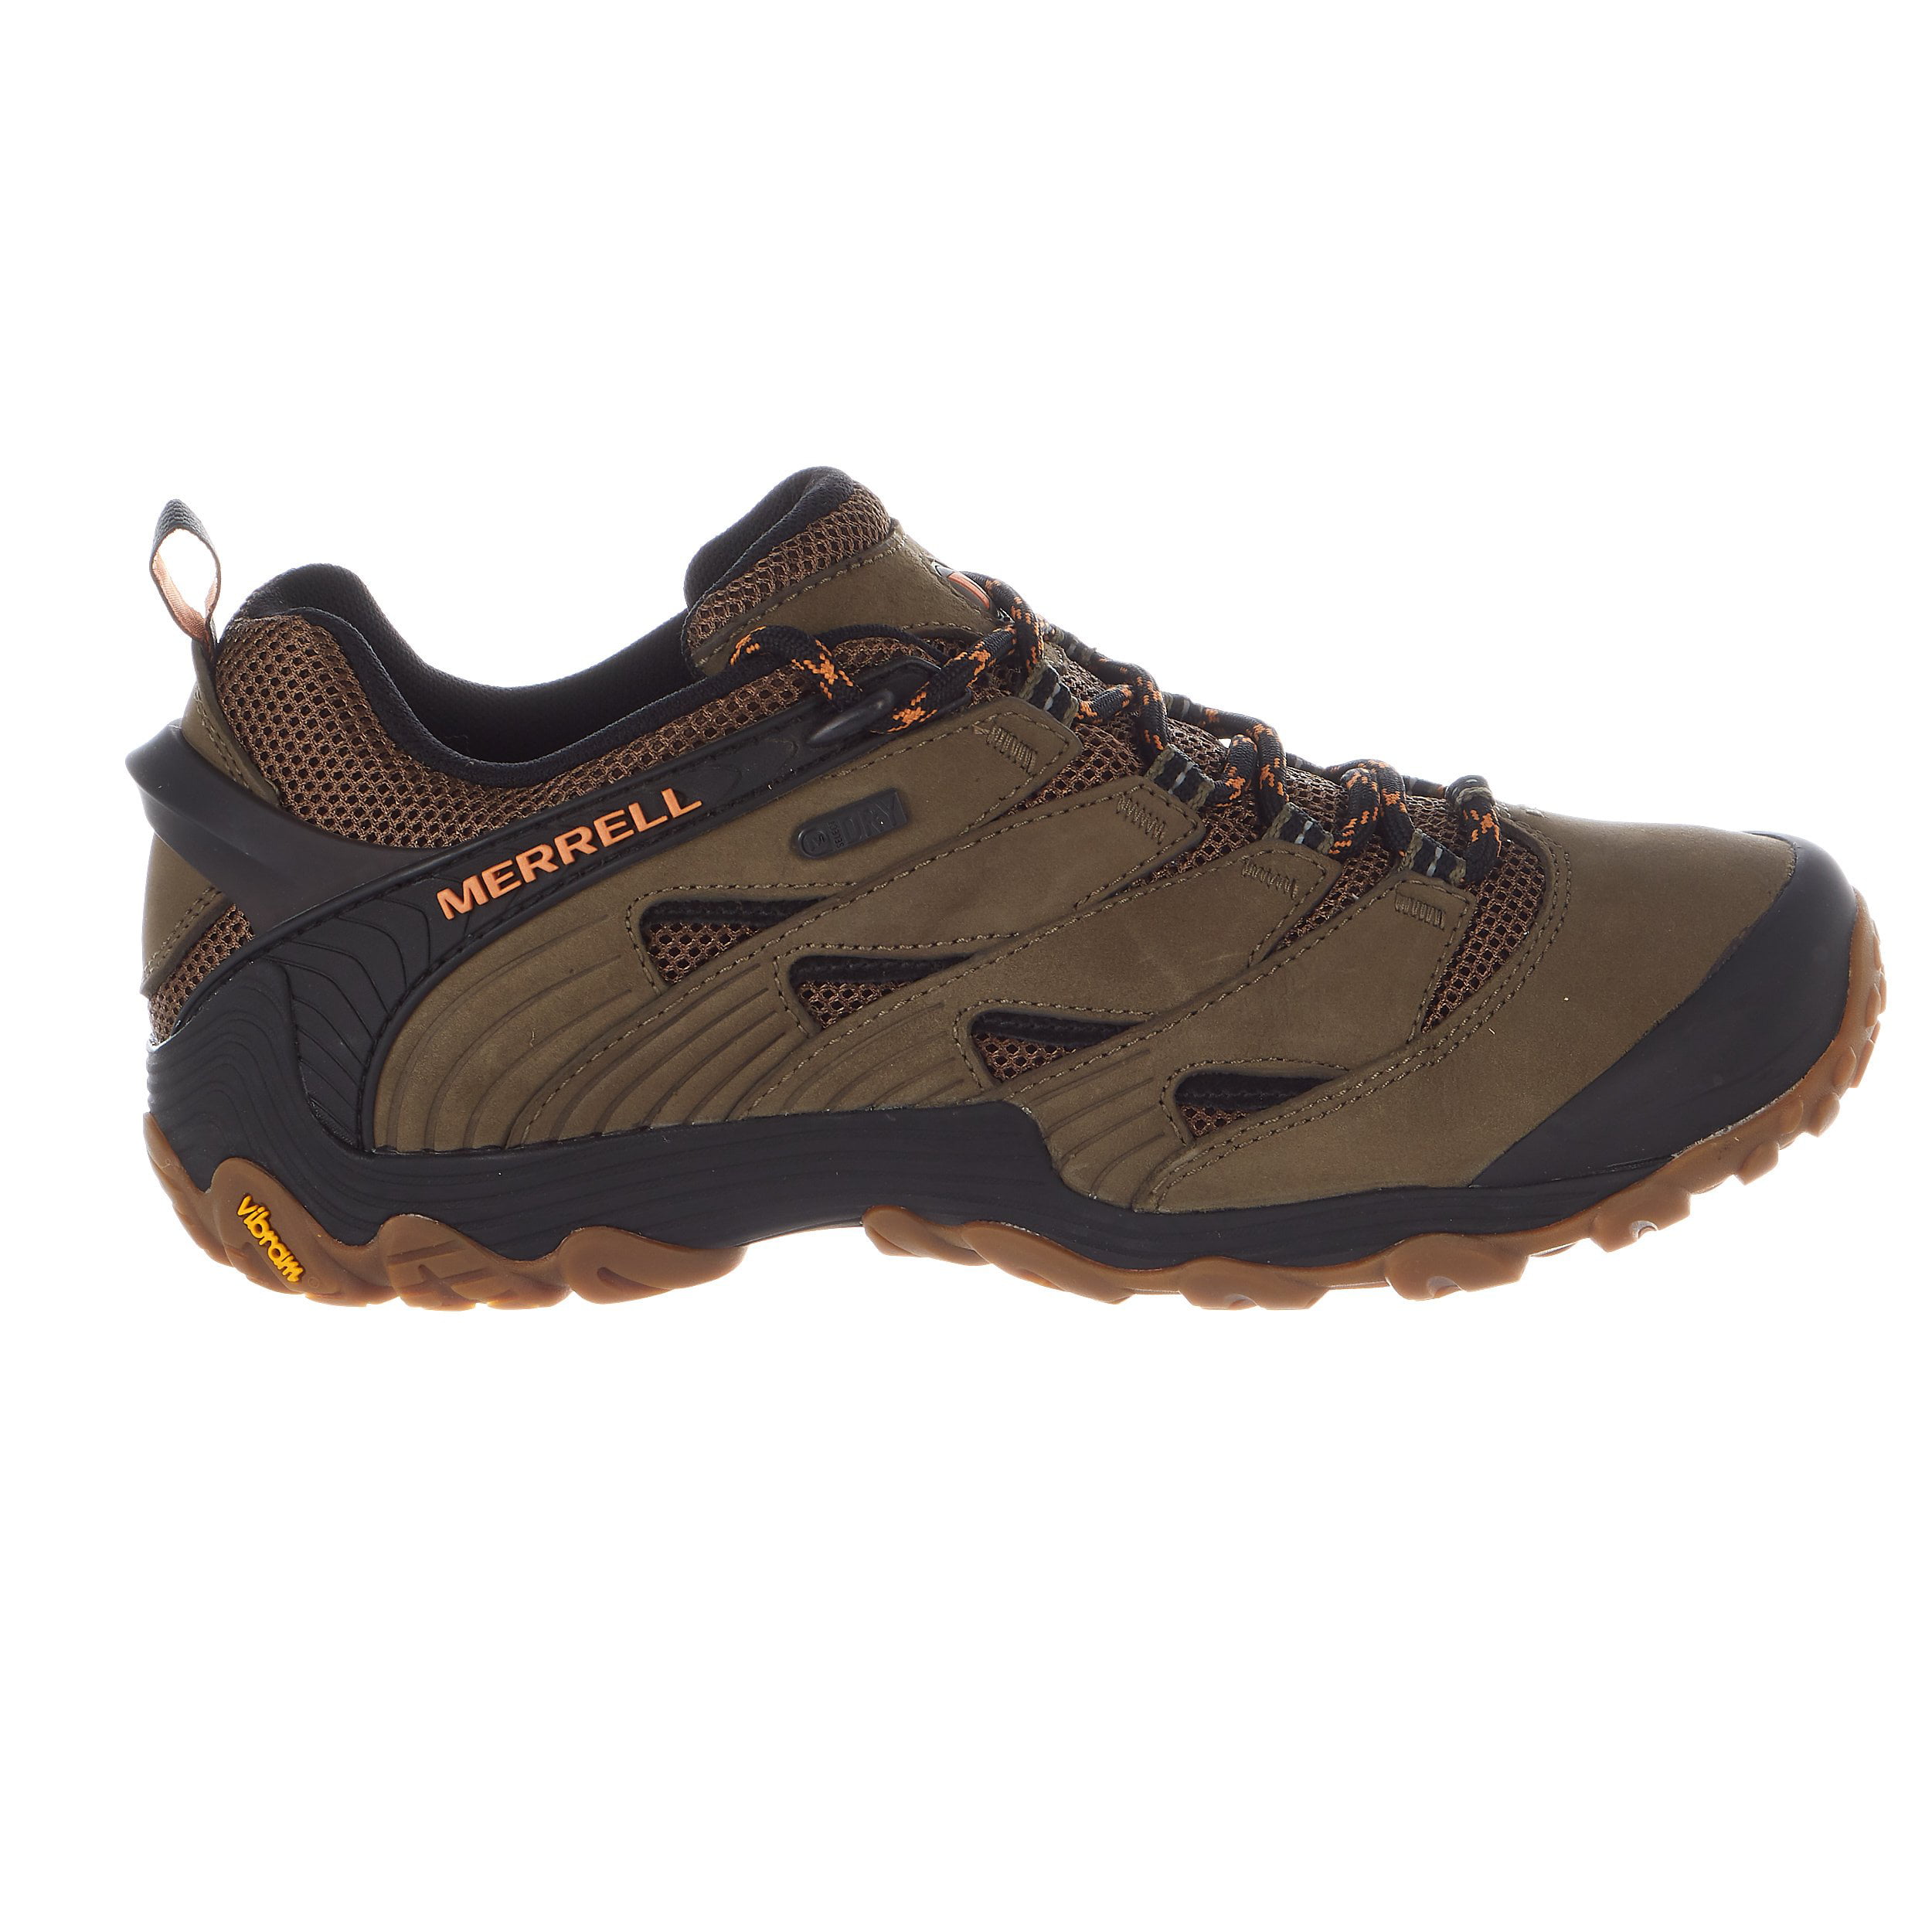 New Merrell Chameleon 7 Limit Mid Waterproof Men Trail Hiking Shoes All Sizes 